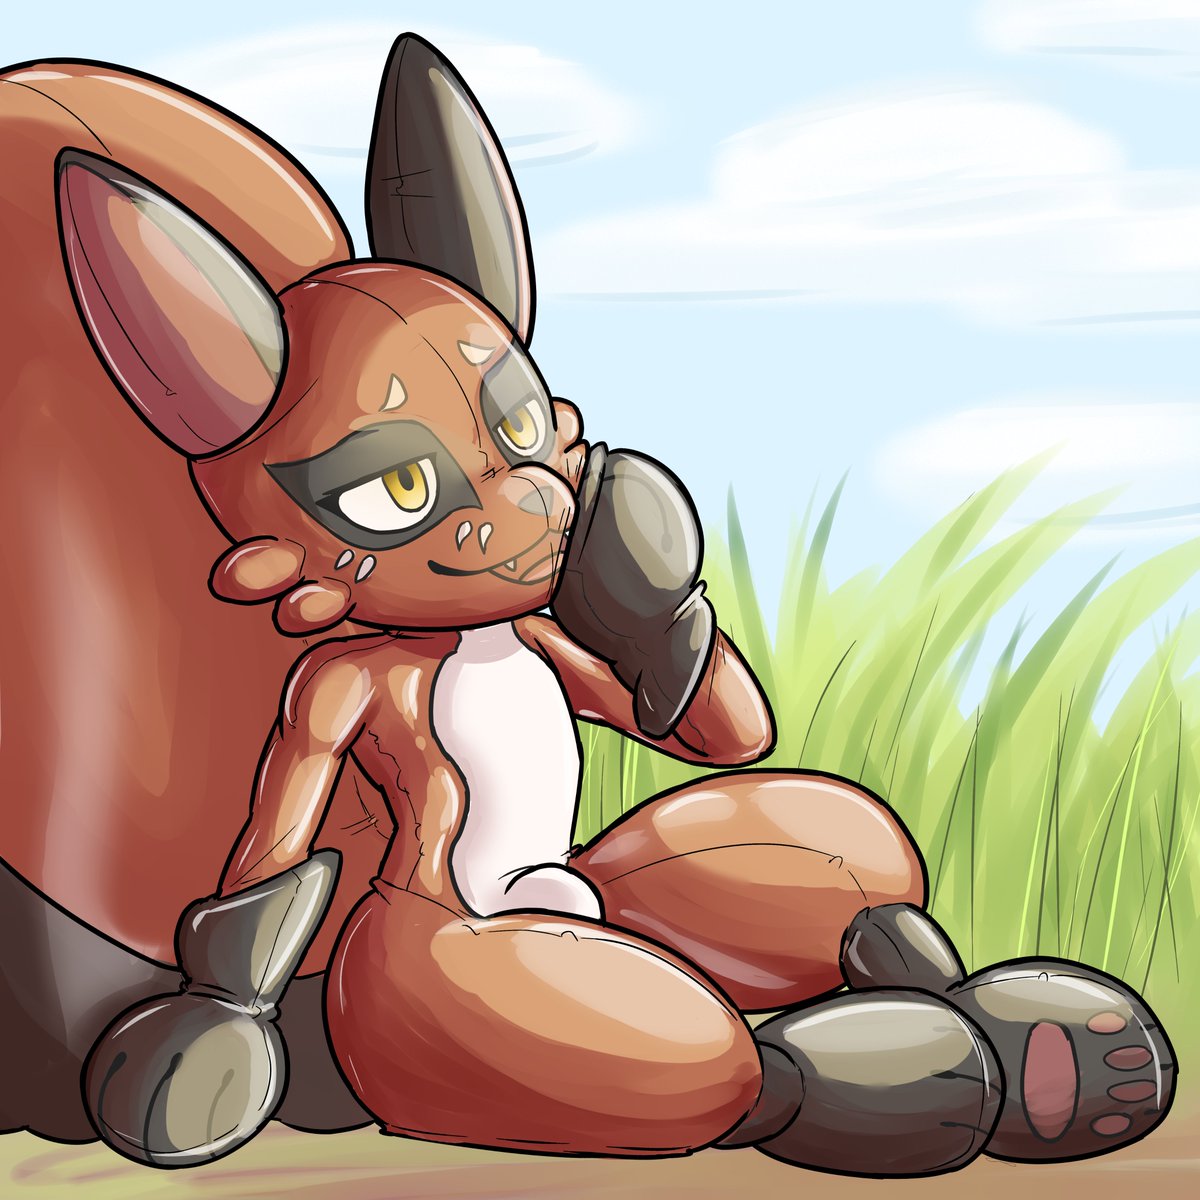 Pokemon Day, huh? Might as well show off what I found while venturing throw some tall grass~